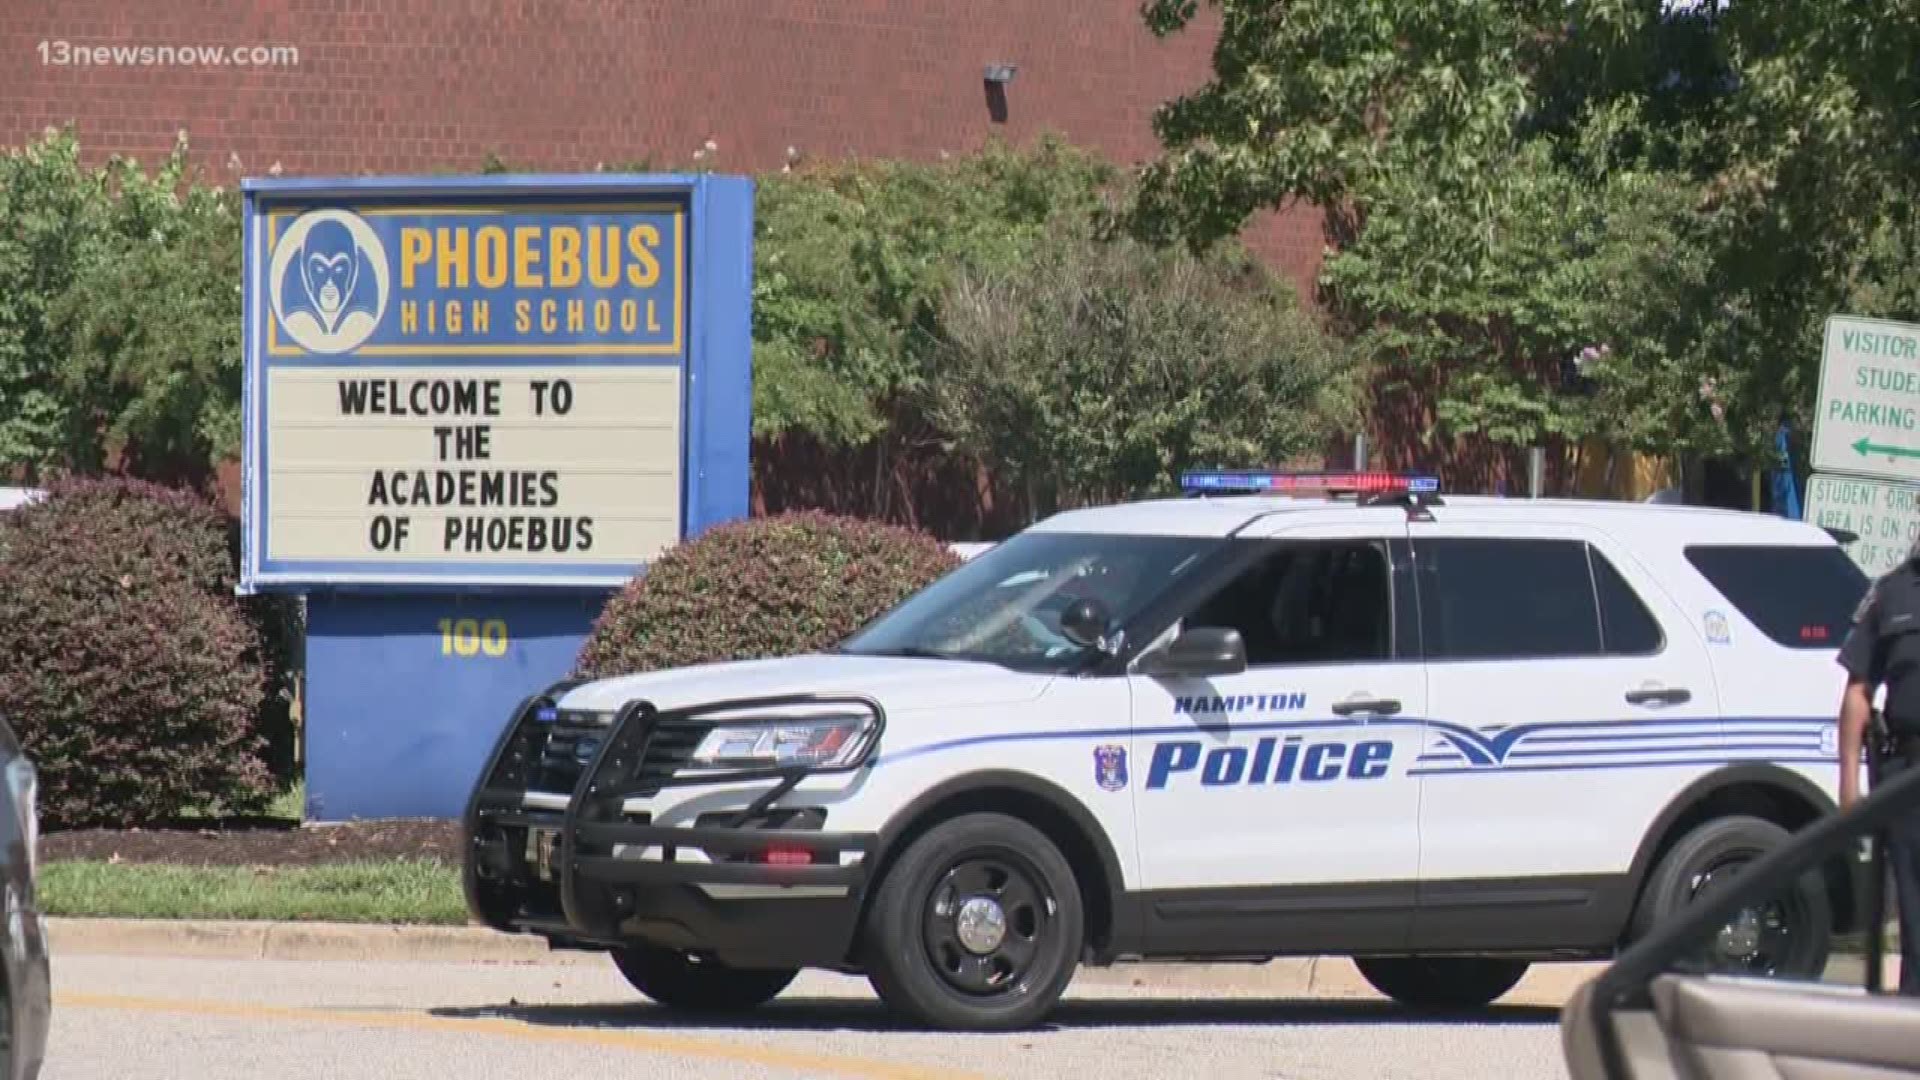 A 38-year-old man was found shot in Phoebus High School's parking lot. Hampton police said the shooting, itself, wasn't school-related and that it didn't take place on school property.